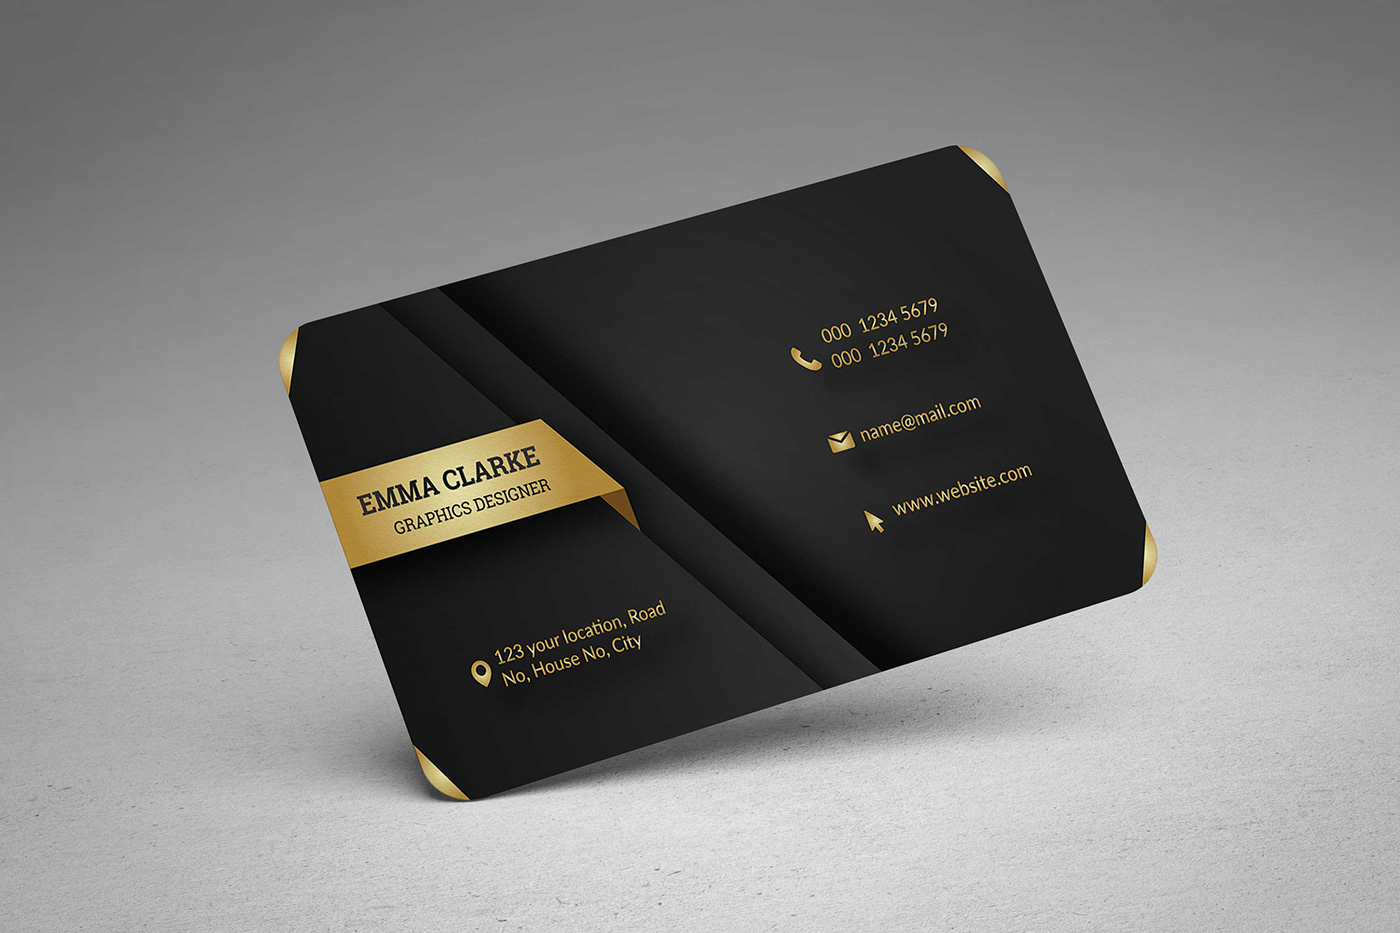 This is a Creative Modern Black & Golden Luxury Business Card Design.